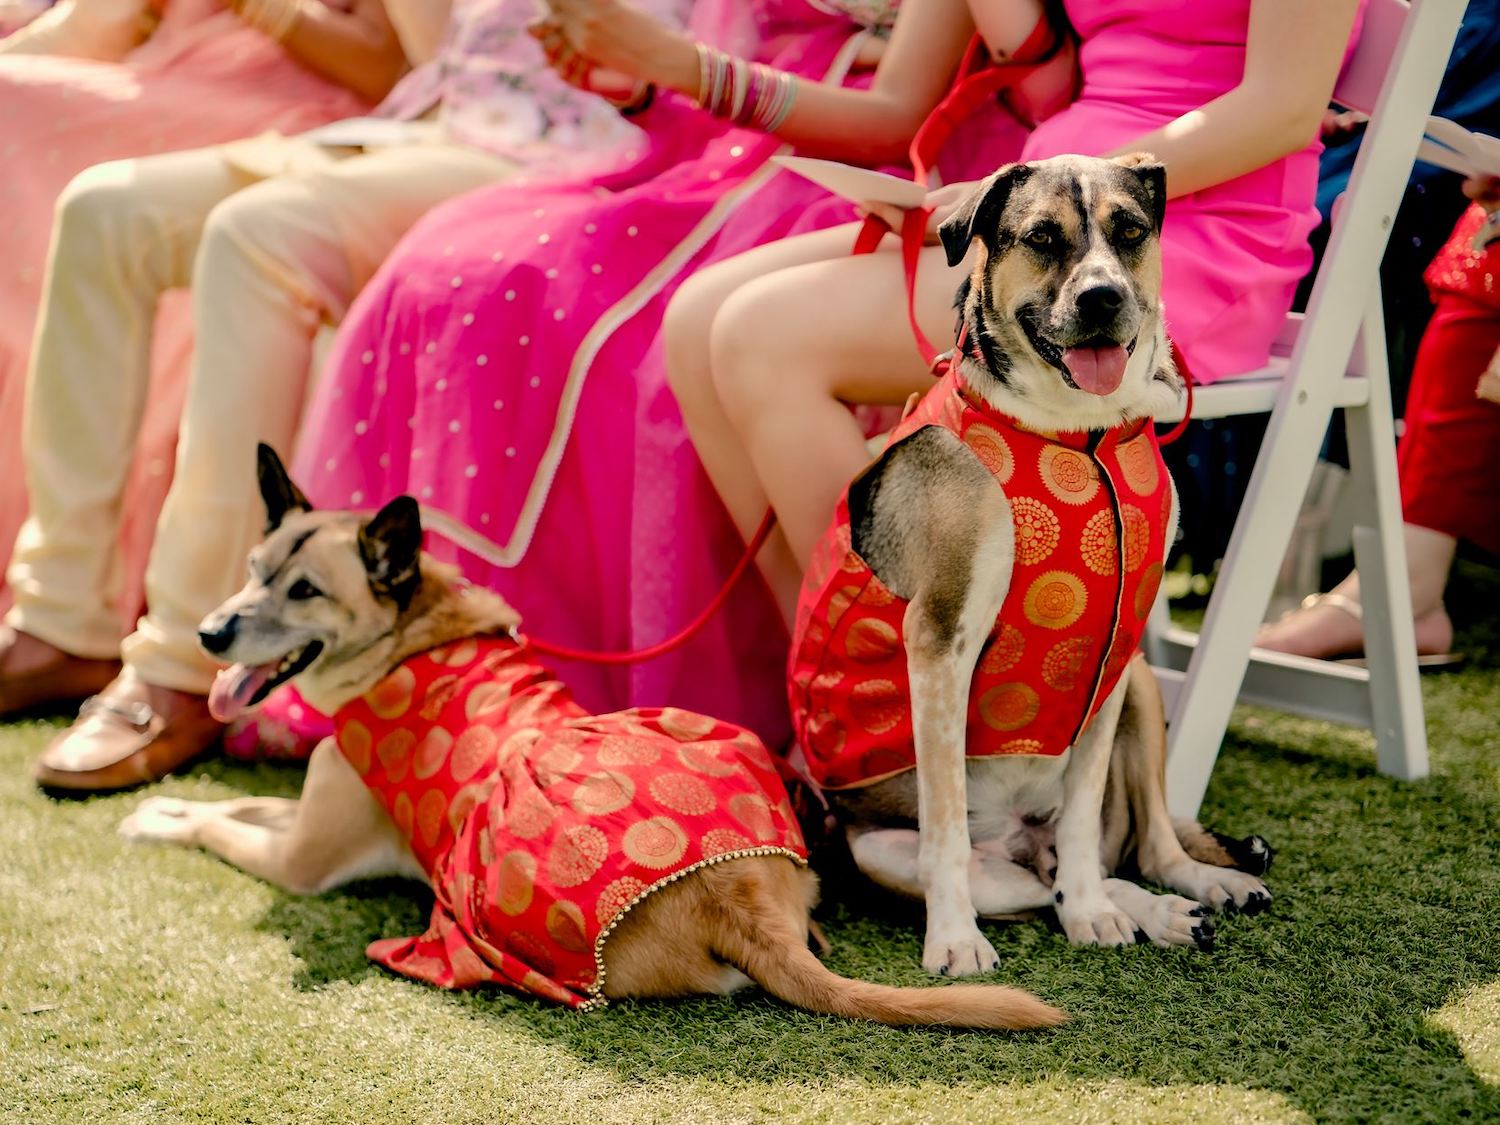 The couple's dogs dressed in their Lehengas and Sherwanis for the Indian Fusion wedding ceremony